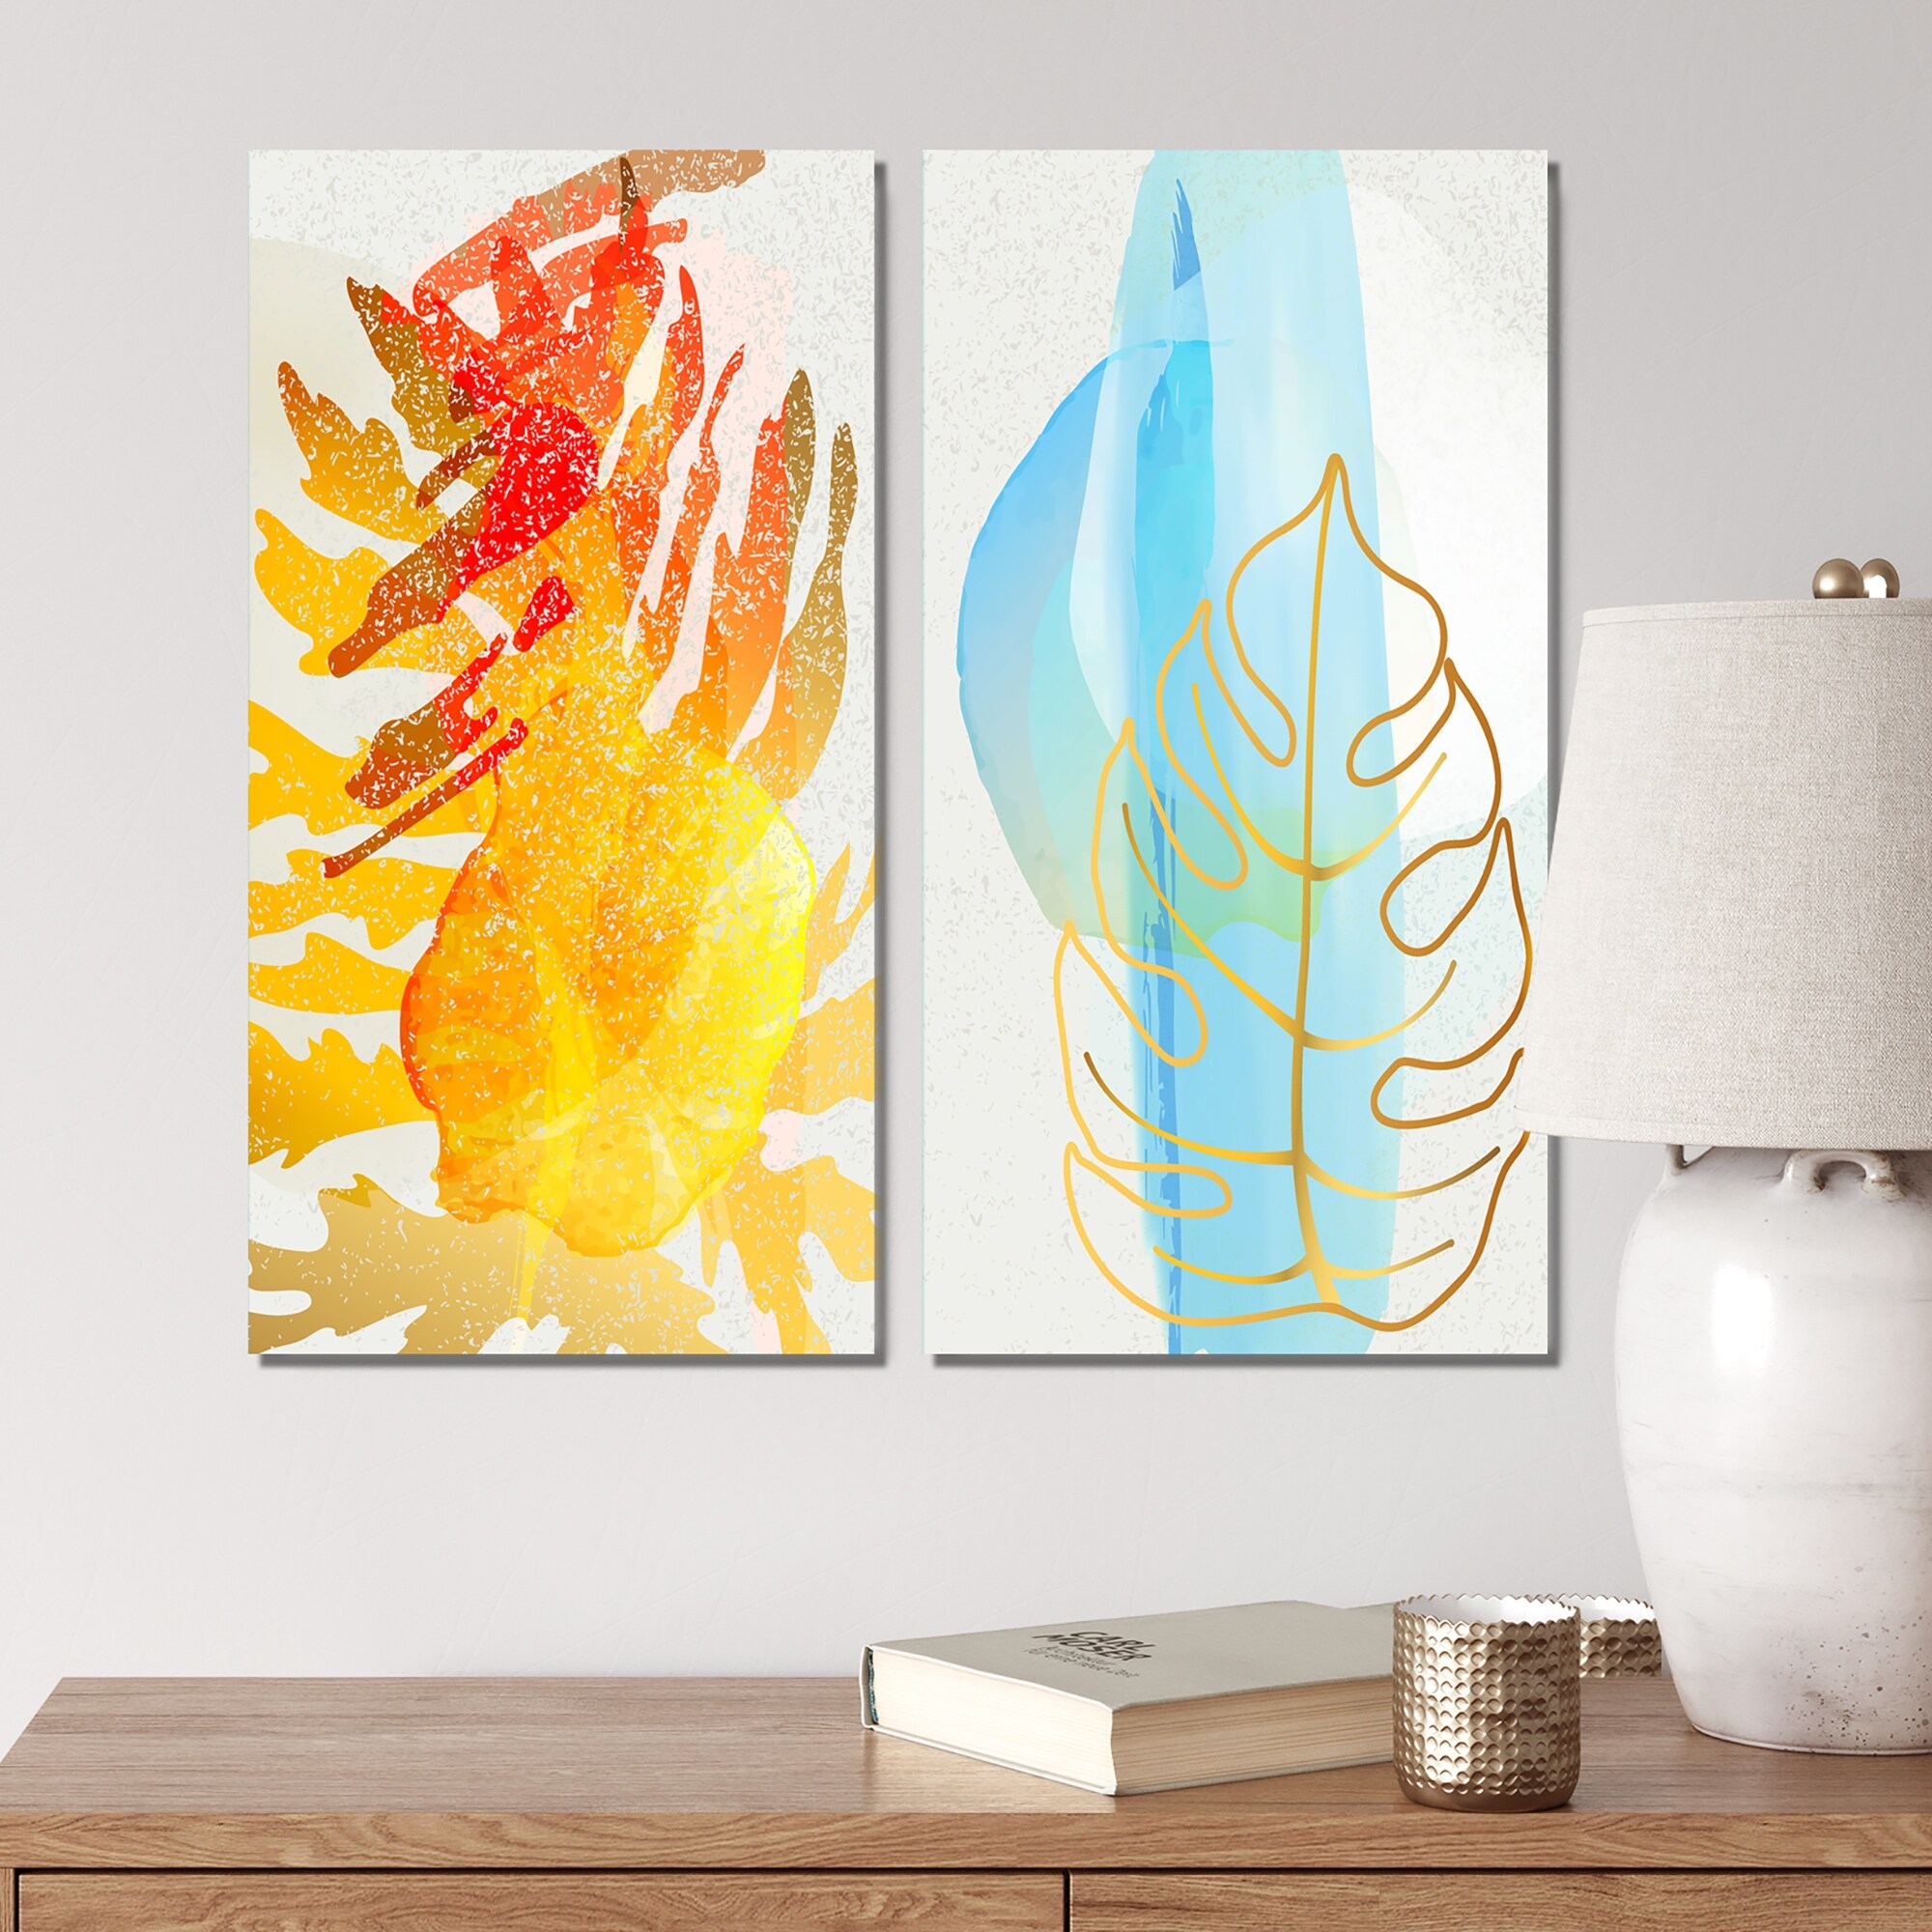 Designart 'Trendy Abstracts With Vibrant Organic Shapes V' Geometric Set of 2 Pieces